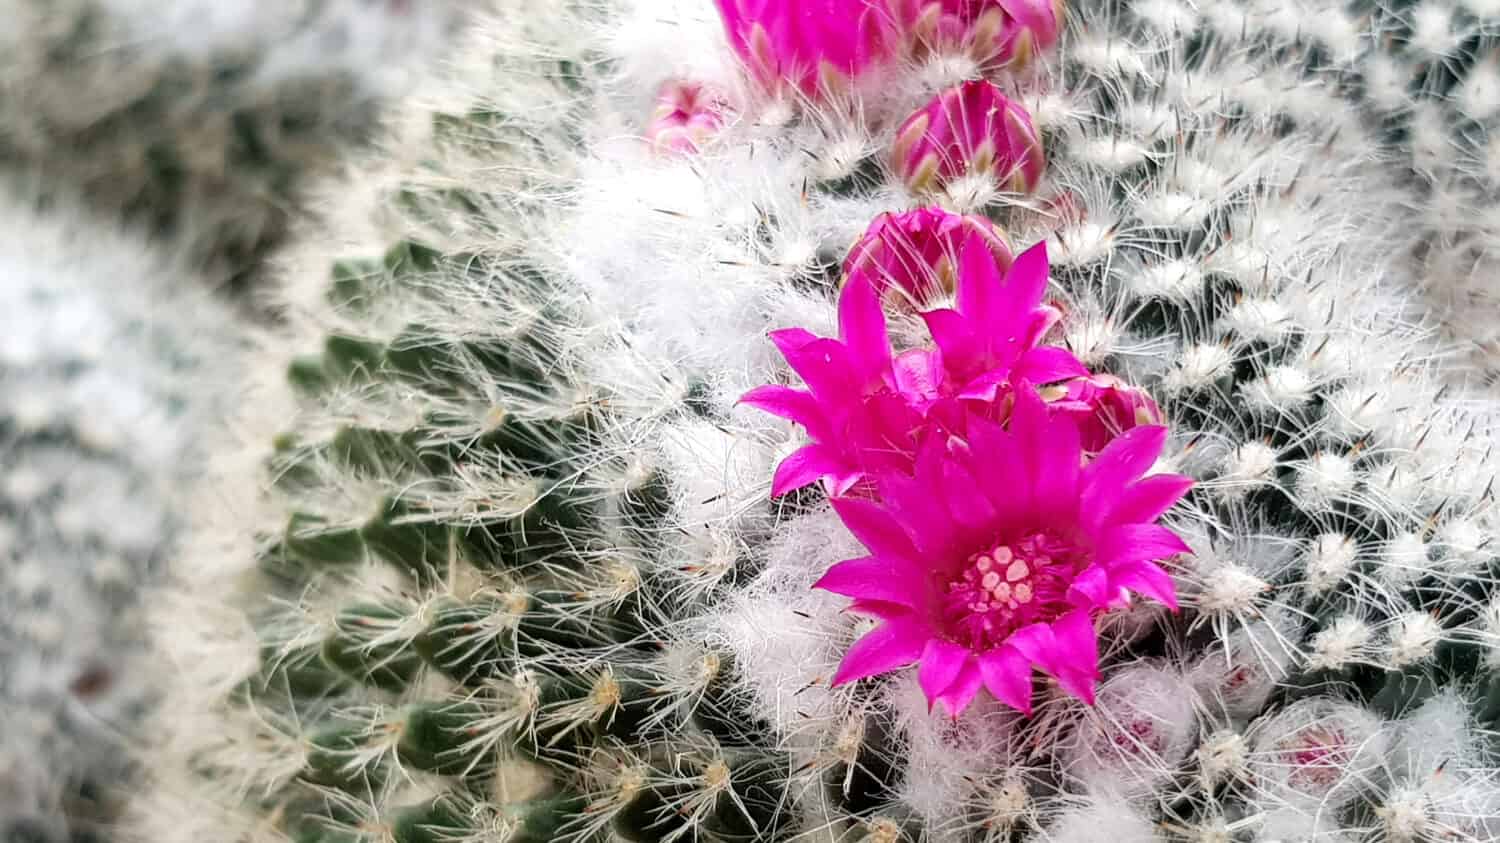 Cactus plant. A close up of a Old lady cactus flowering, Mammillaria hahniana.